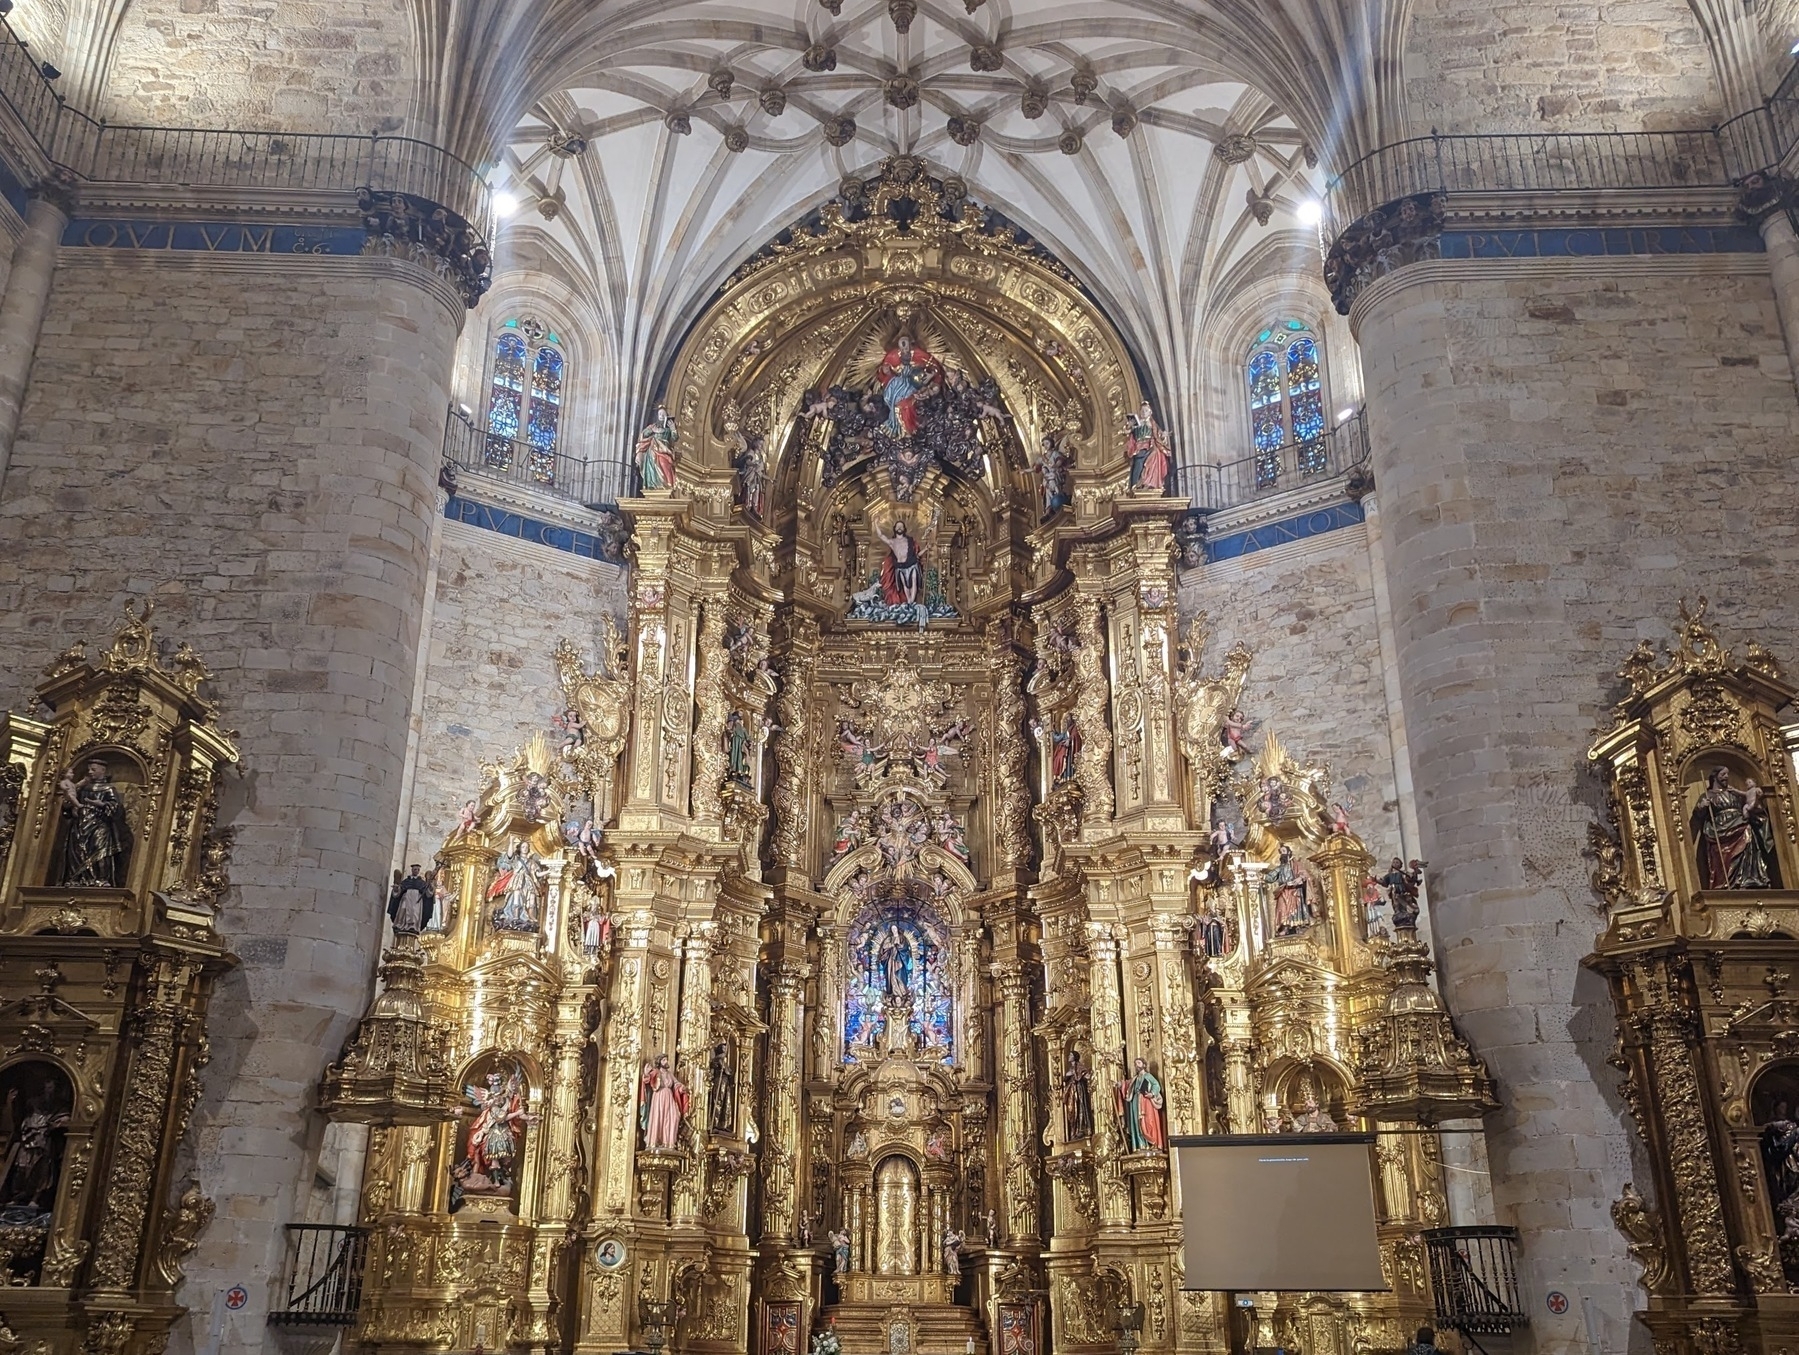 An ornate, gilded altar in a medieval Spanish church lit with sunlight and artificial light.